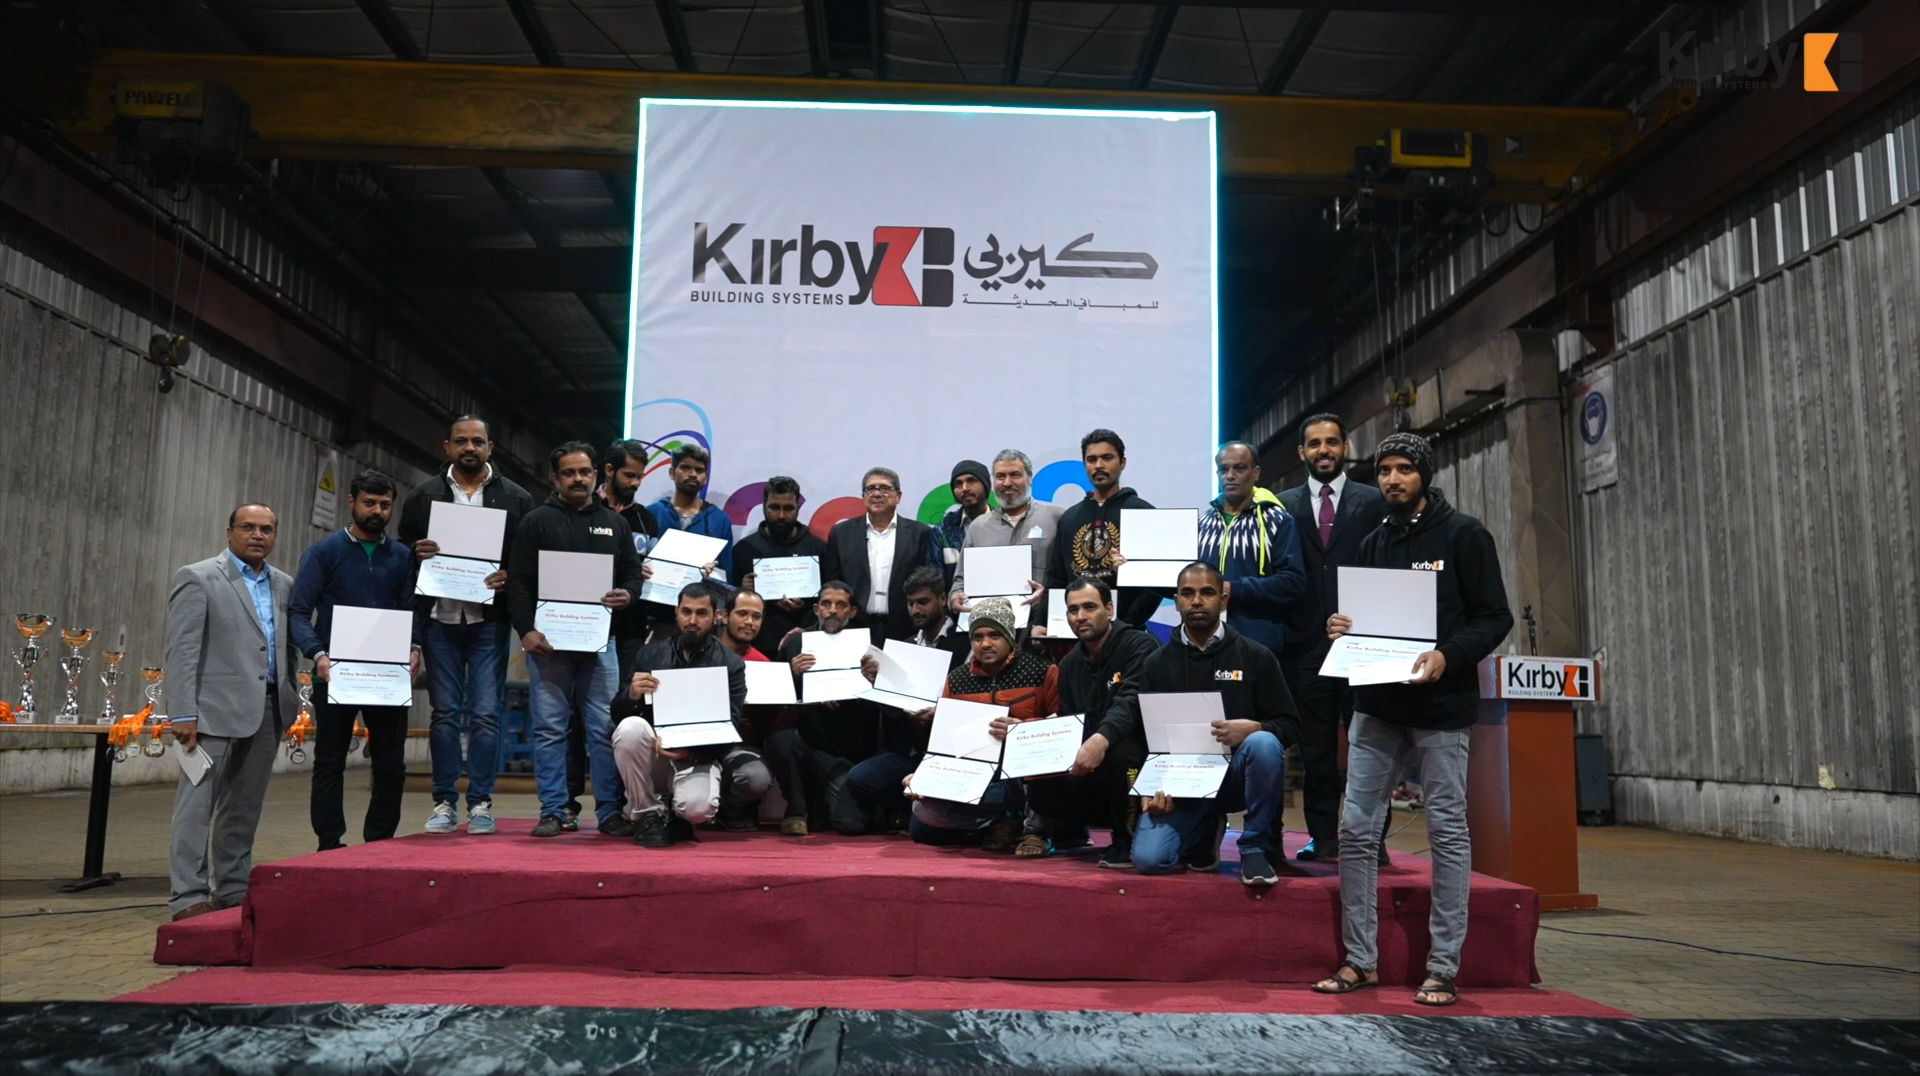 Kirby Building Systems 